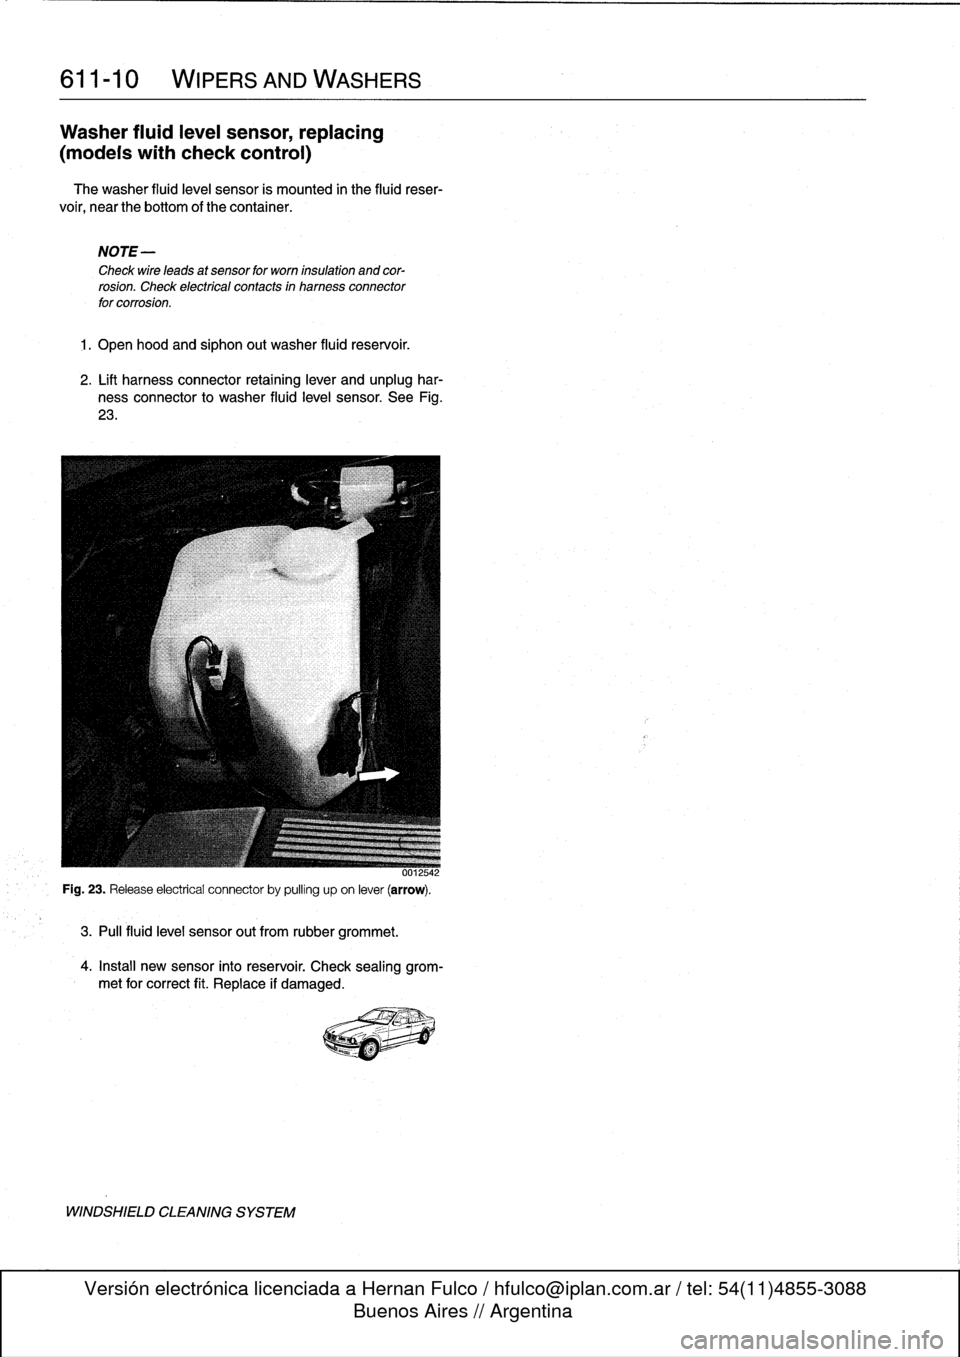 BMW 323i 1997 E36 Workshop Manual 
611-
1
0

	

WIPERS
AND
WASHERS

Washer
fluidleve¡
sensor,
replacing

(modeis
with
check
control)

The
washer
fluid
level
sensor
is
mounted
in
the
fluid
reser-

voir,
near
the
bottom
of
thecontainer